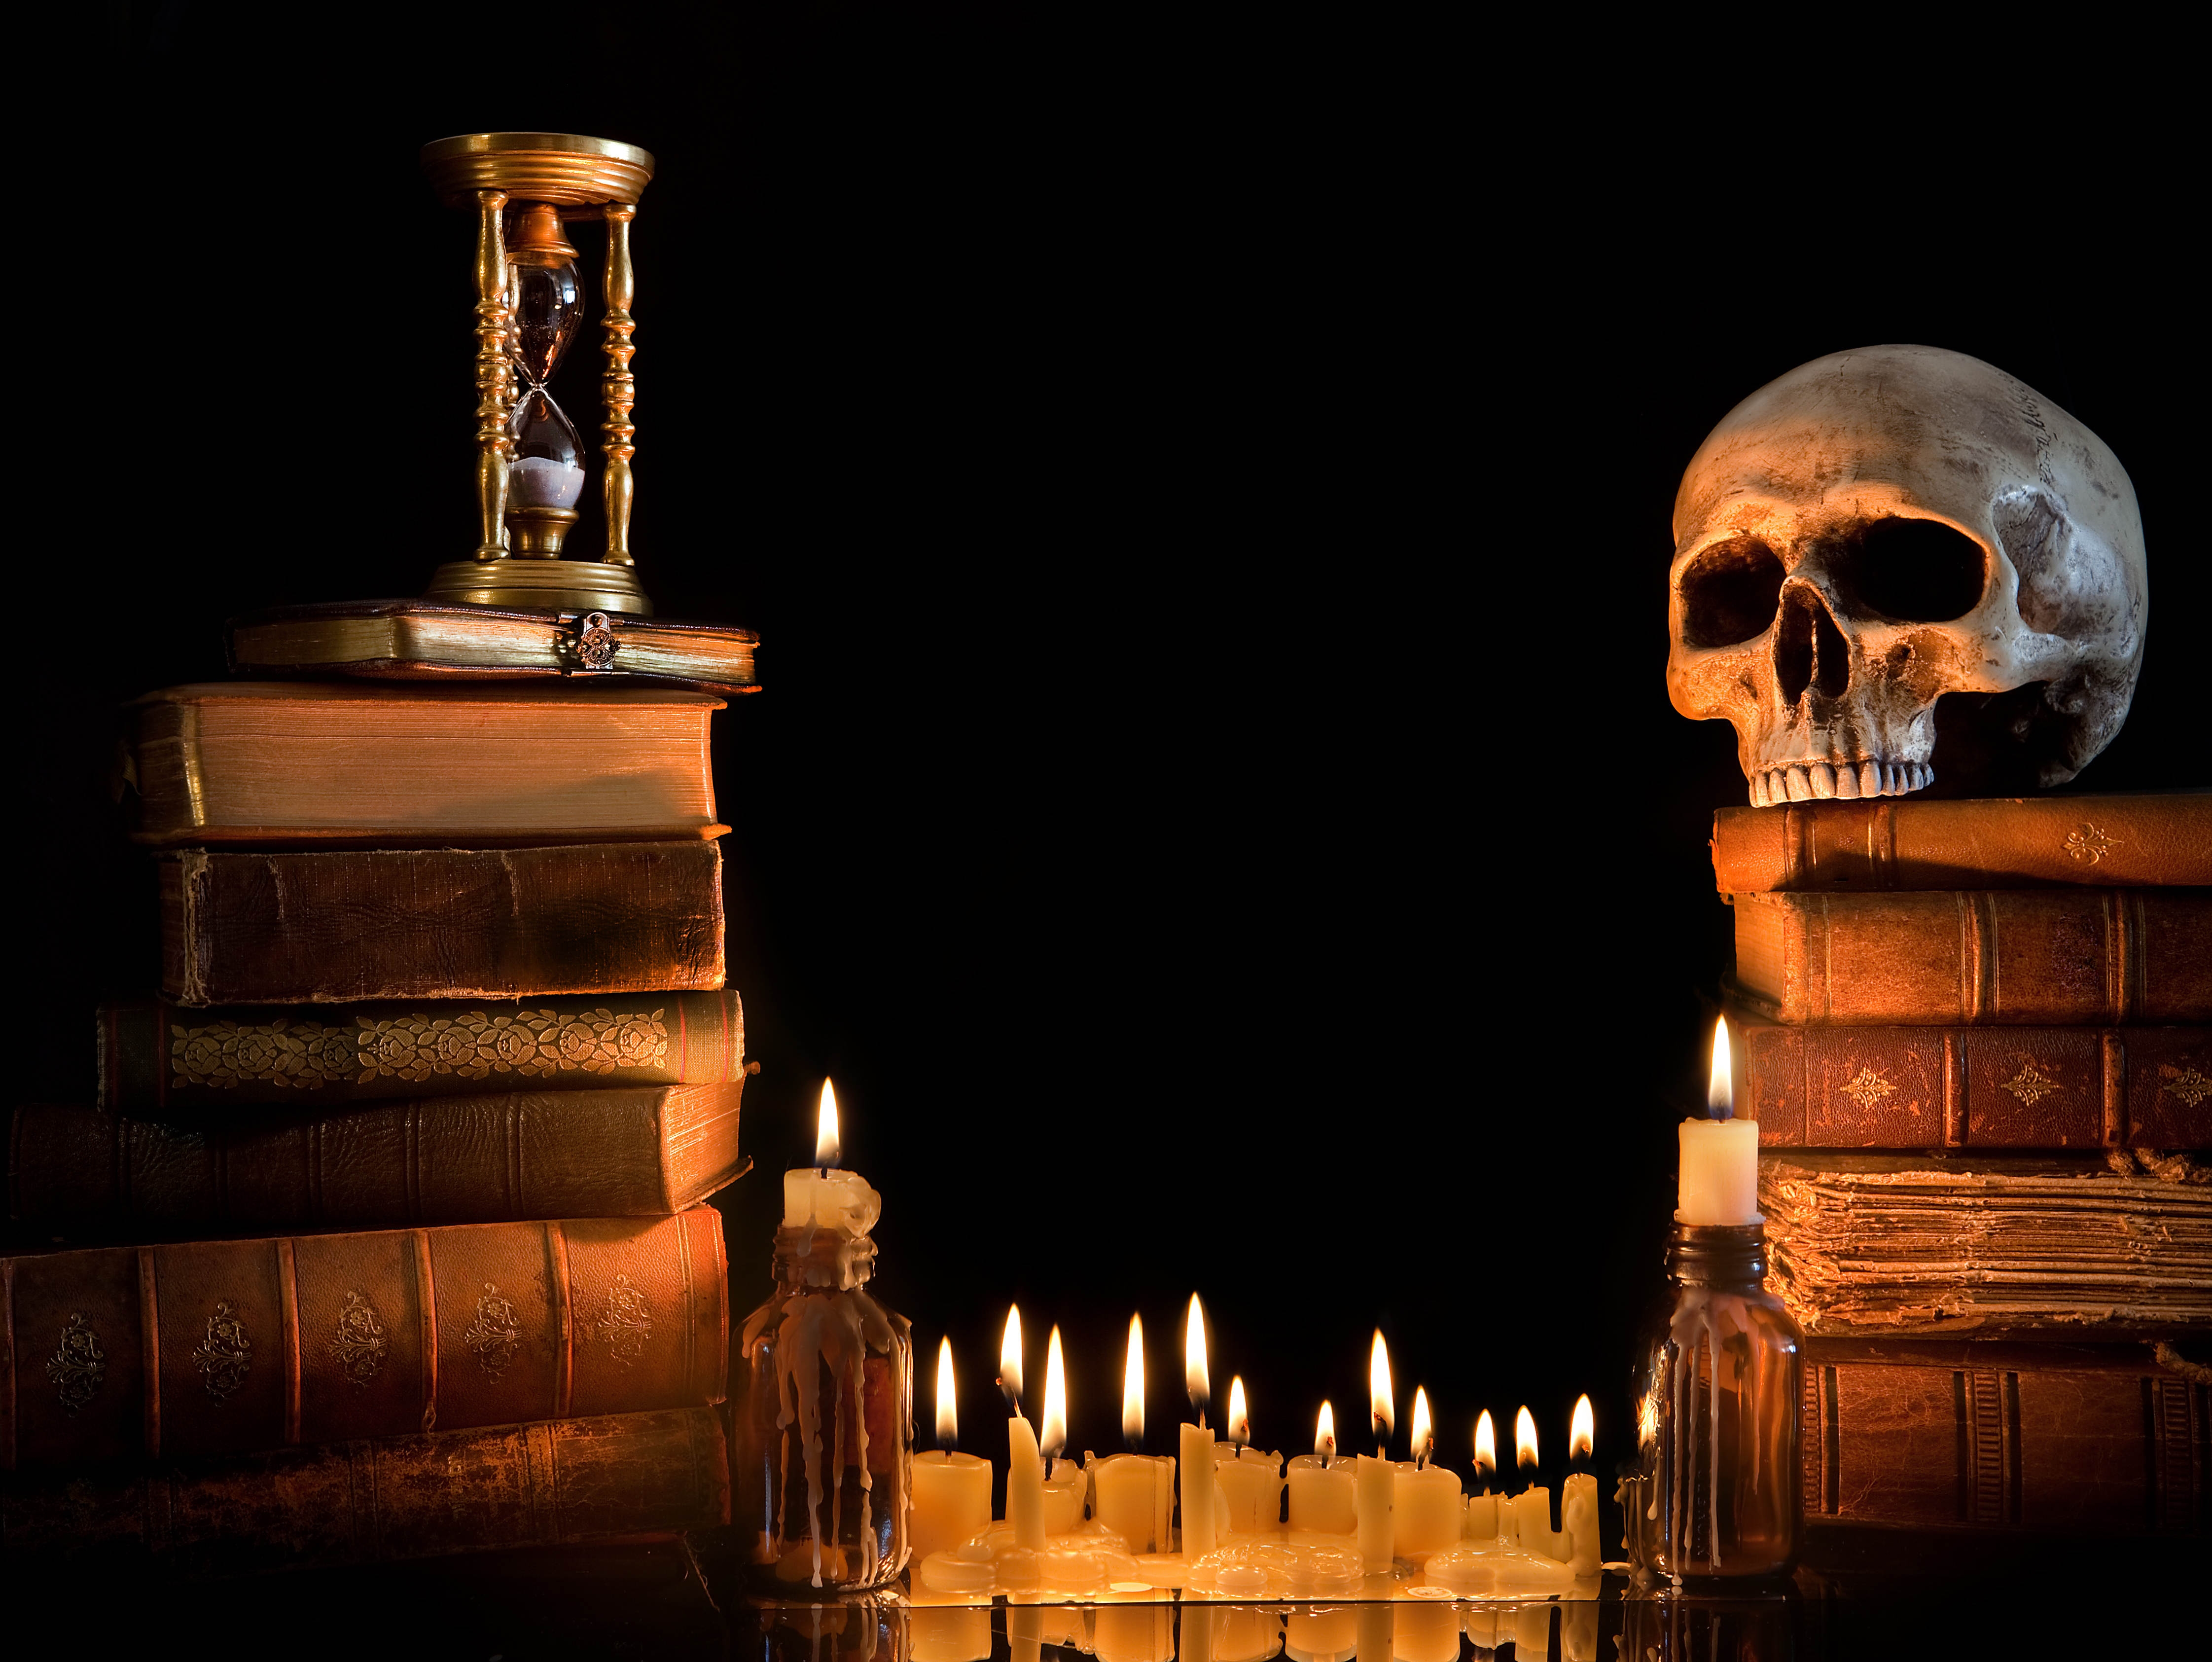 Wallpaper, magic, candles, books, darkness, black background 4486x3370